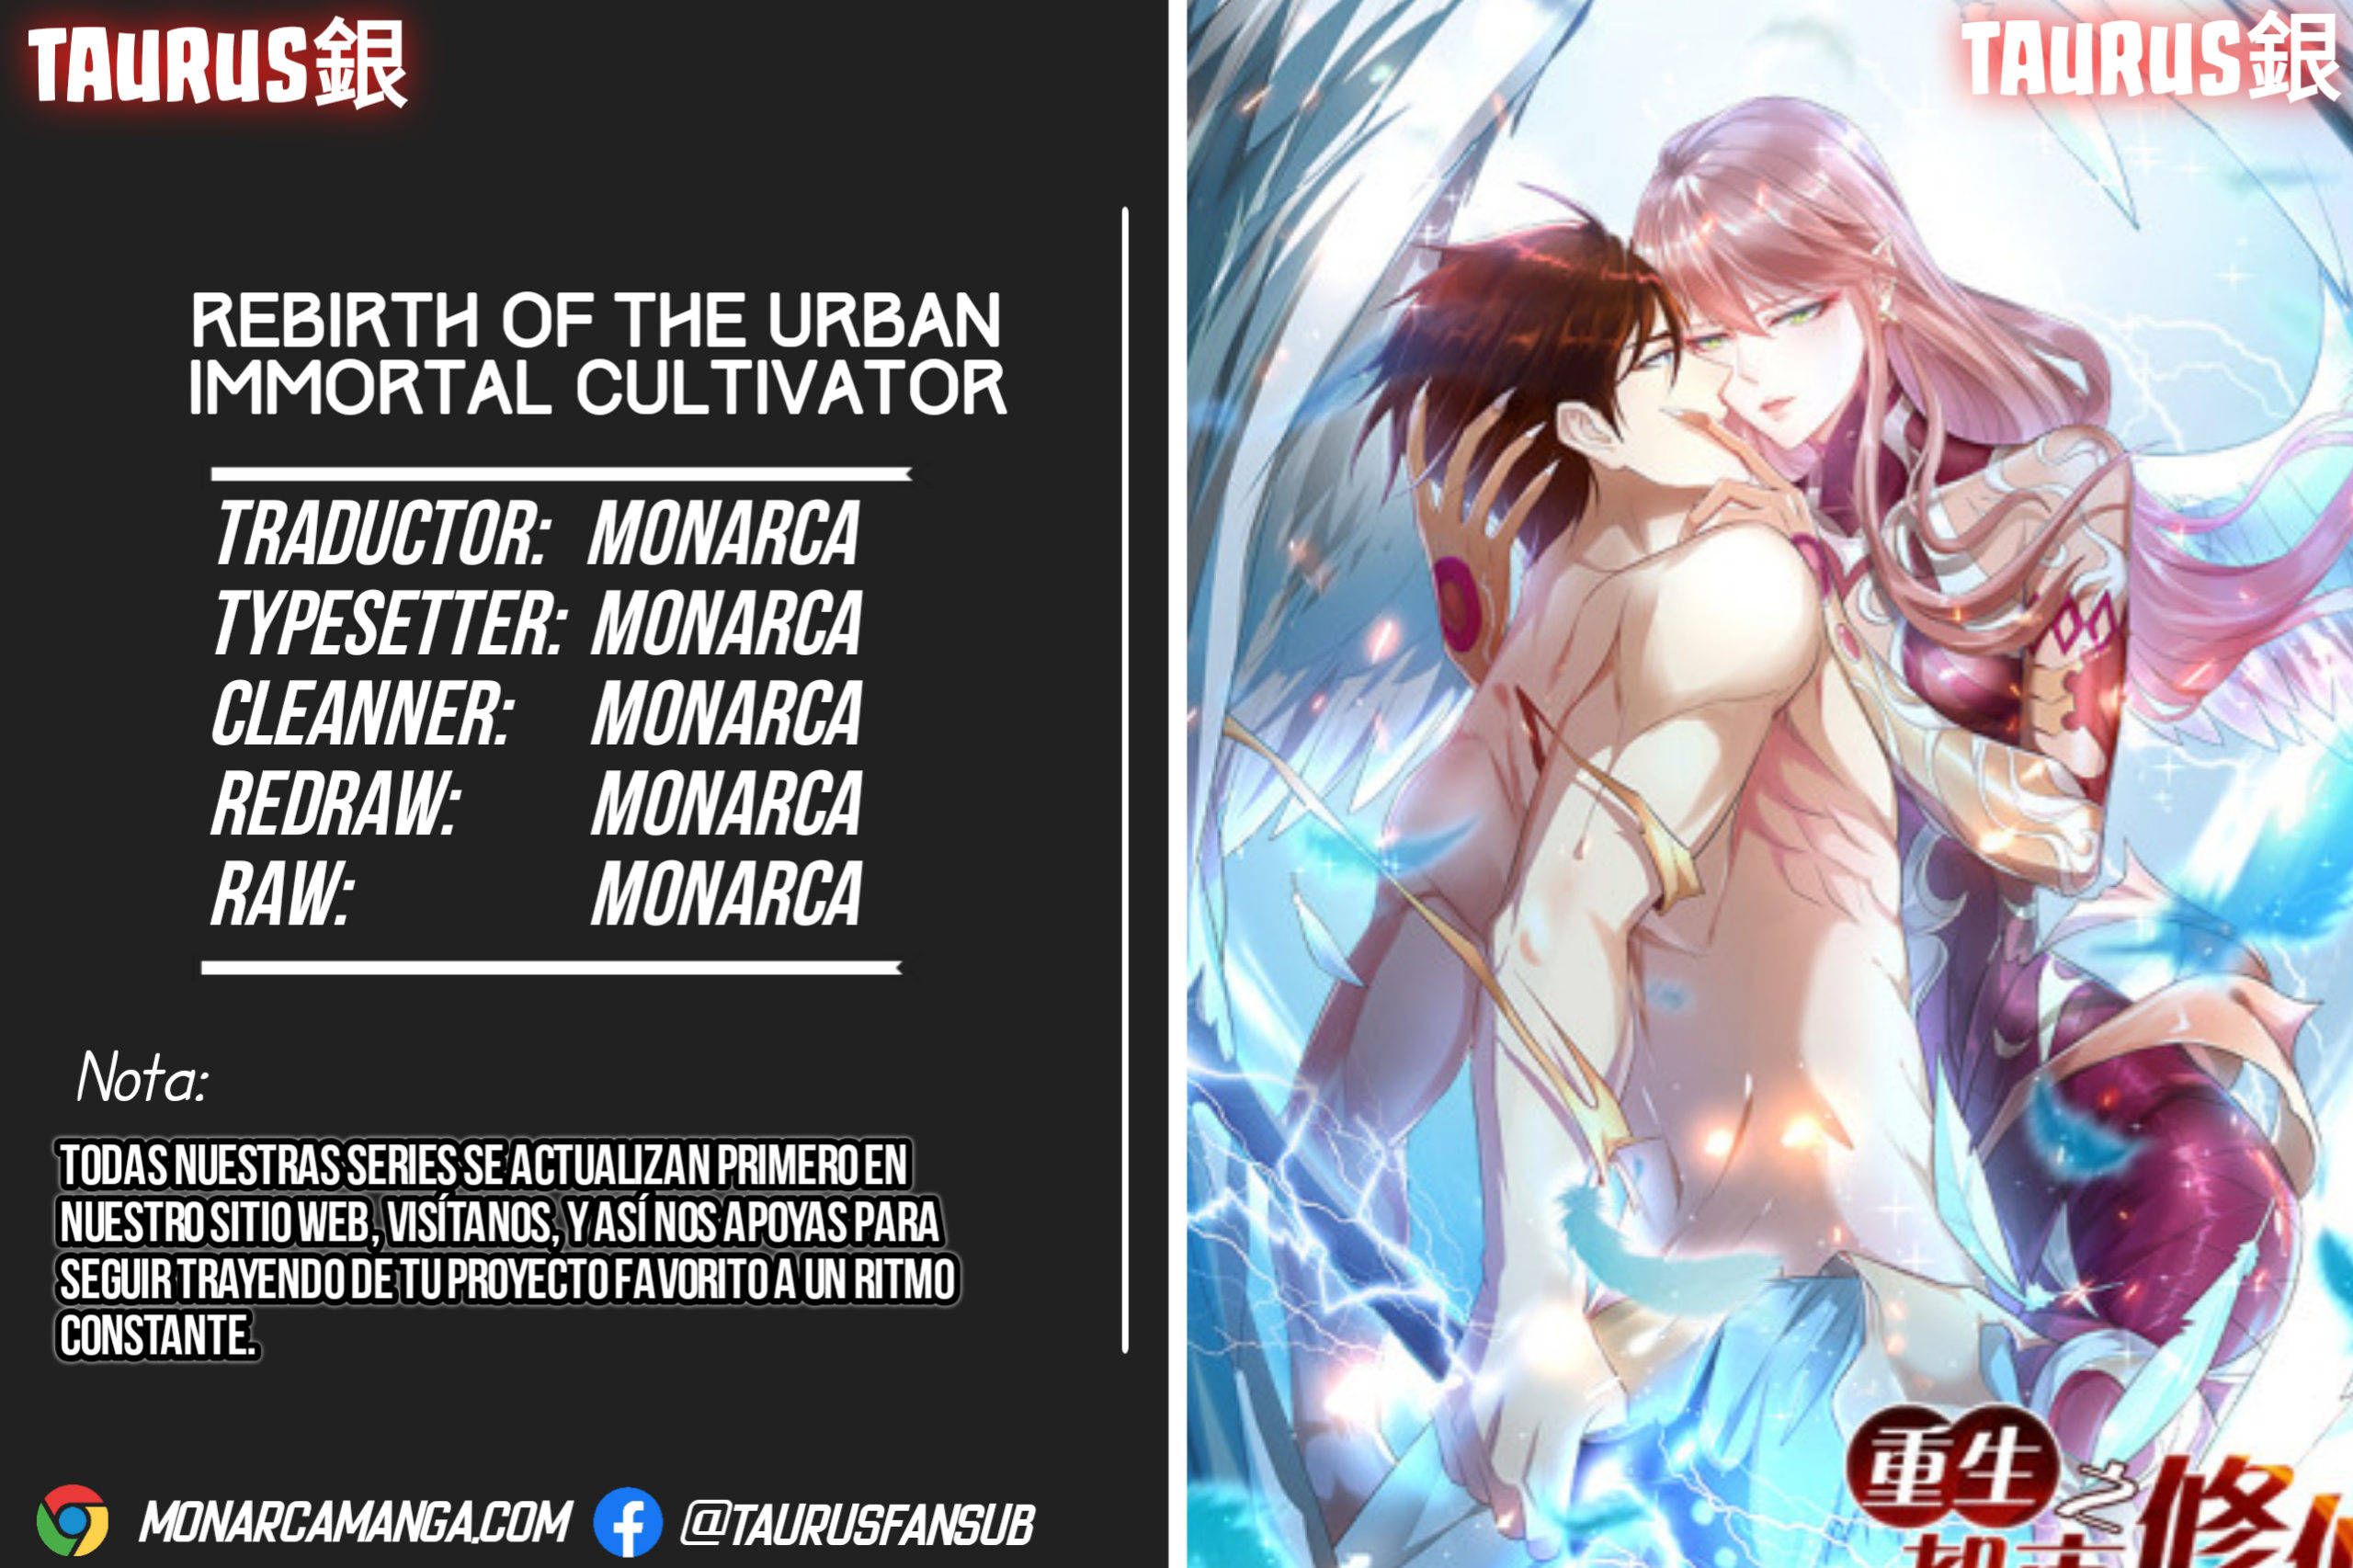 Manga Rebirth Of The Urban Immortal Cultivator Chapter 673 image number 6